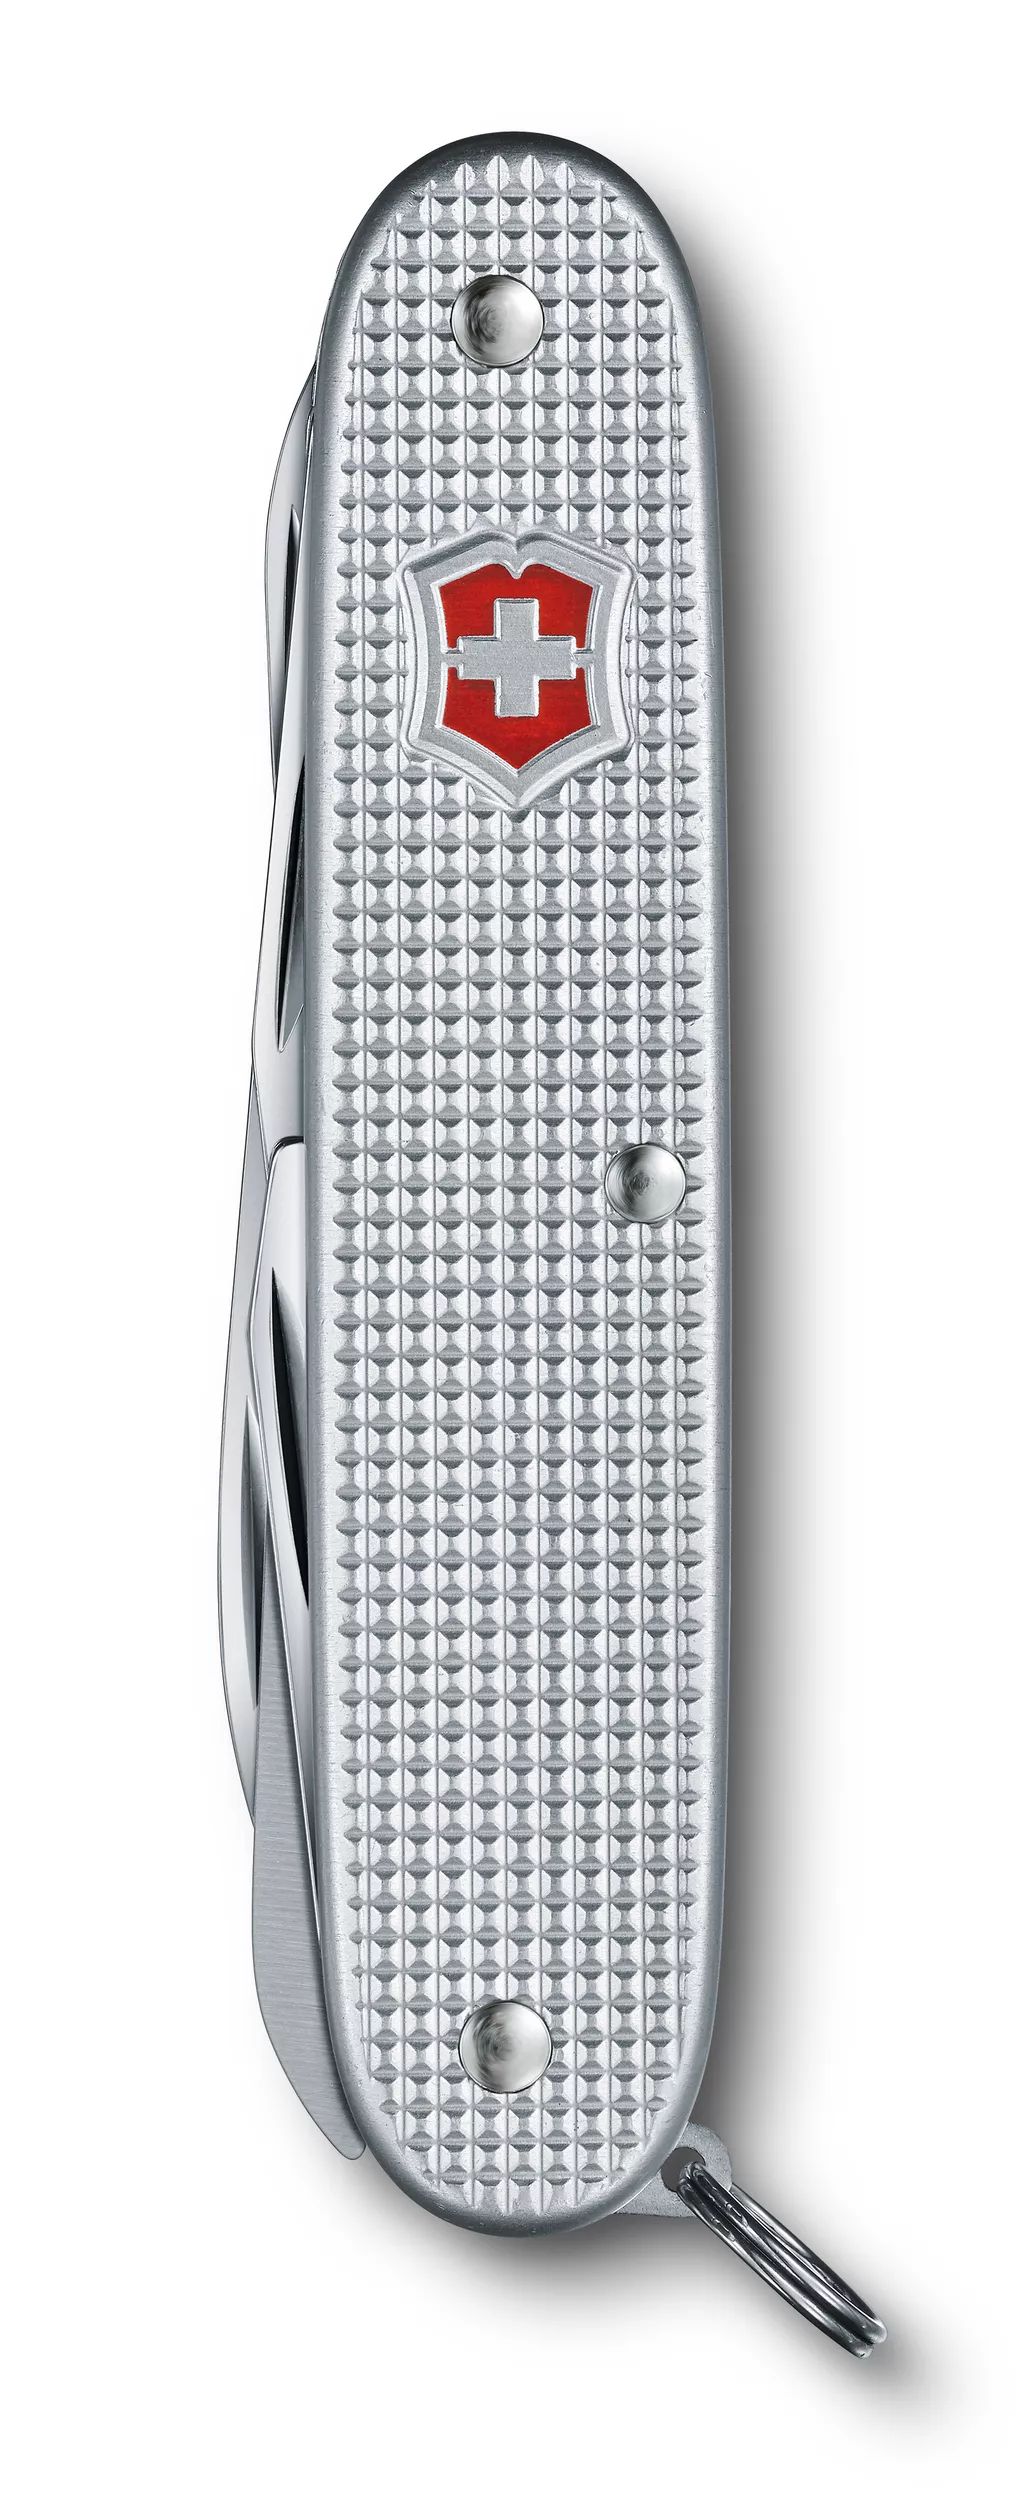  Victorinox Farmer Alox Swiss Army Knife, Multi-Function Swiss  Made Pocket Knife with Large Blade, Screwdriver, Can Opener and Wire  Stripper - 10 Functions : Everything Else